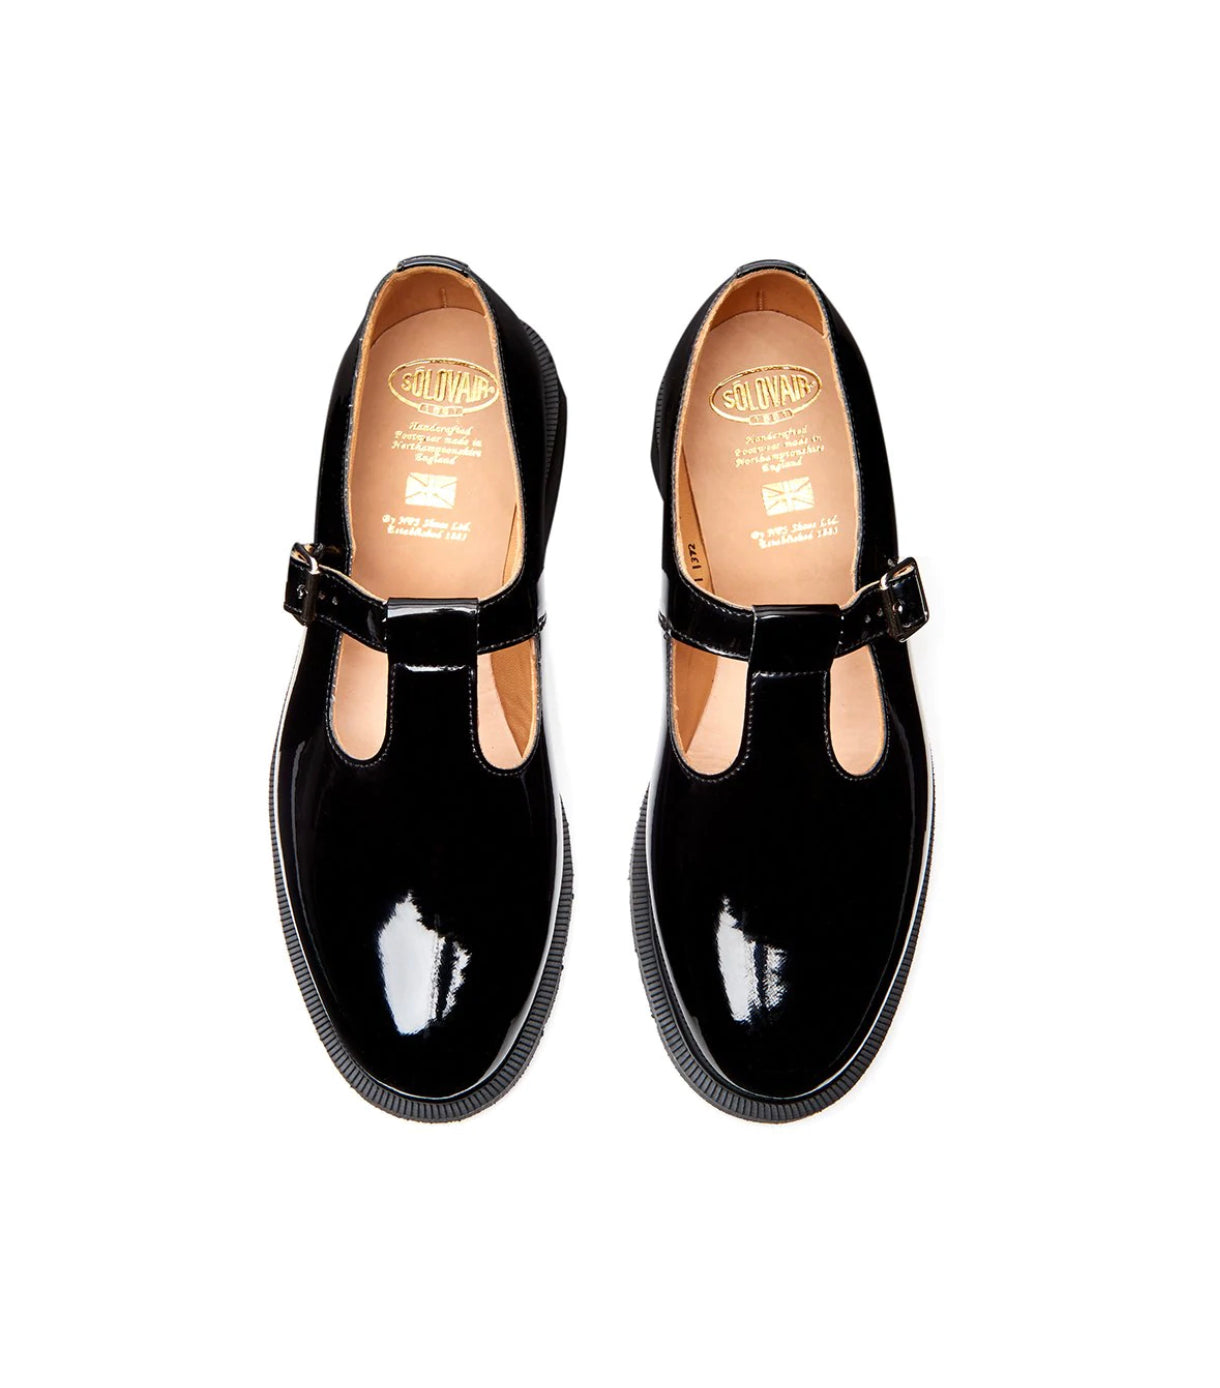 Solovair Black Patent Mary Jane Shoe Made In England